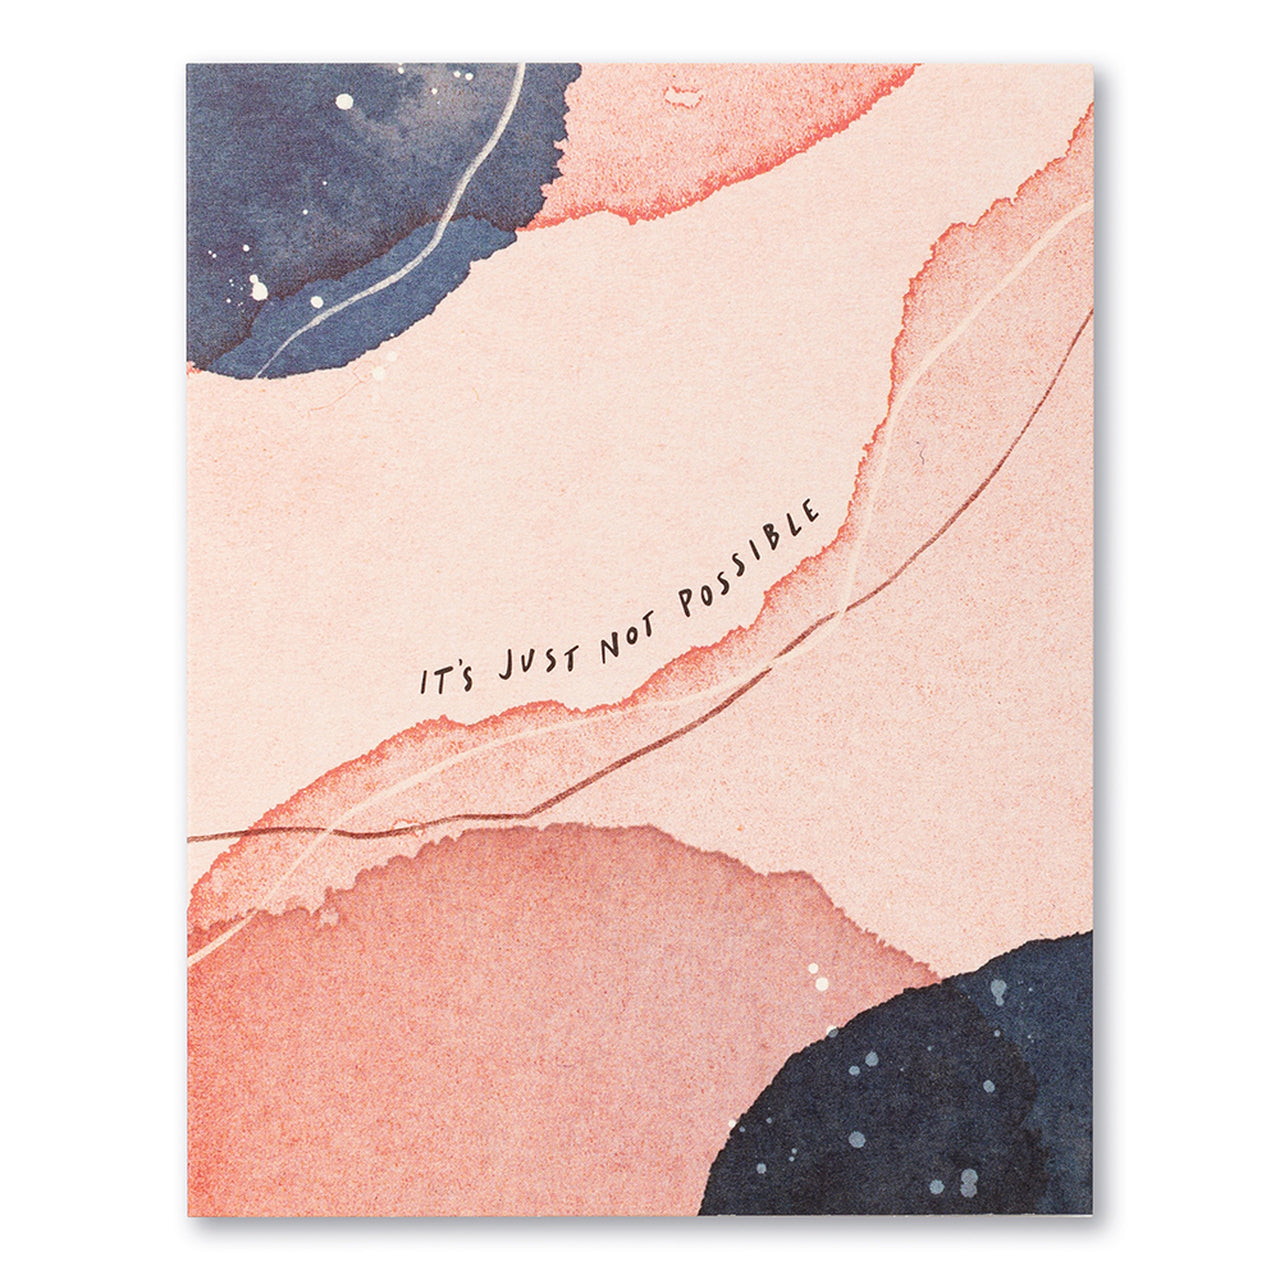 Love Muchly Greeting Card - Love - It's Just Not Possible - Mellow Monkey